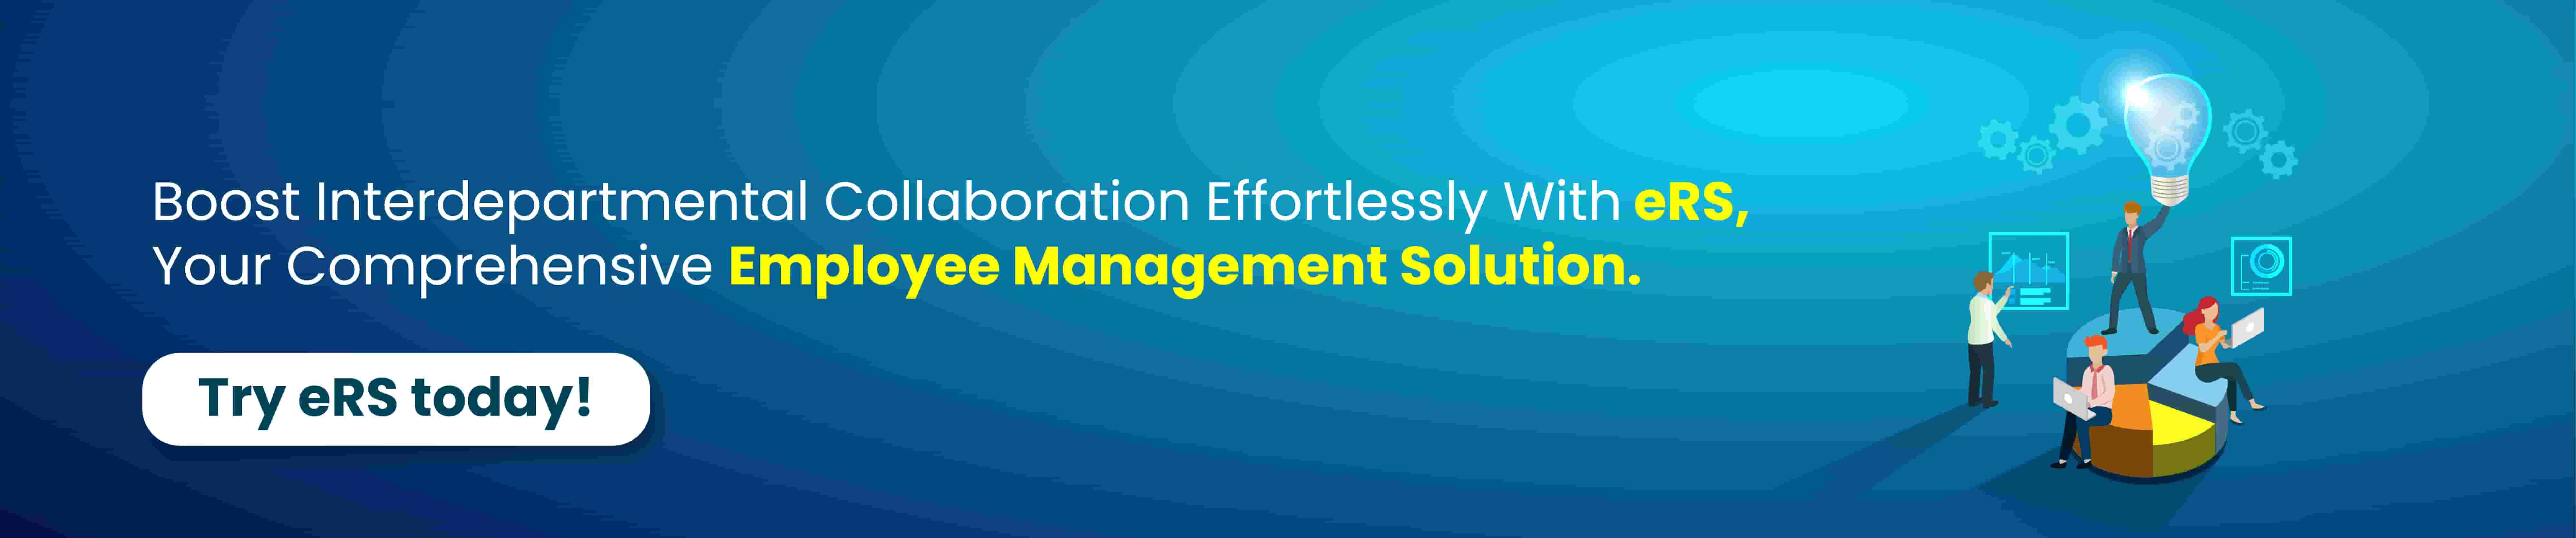 Boost interdepartmental collaboration effortlessly with eRs